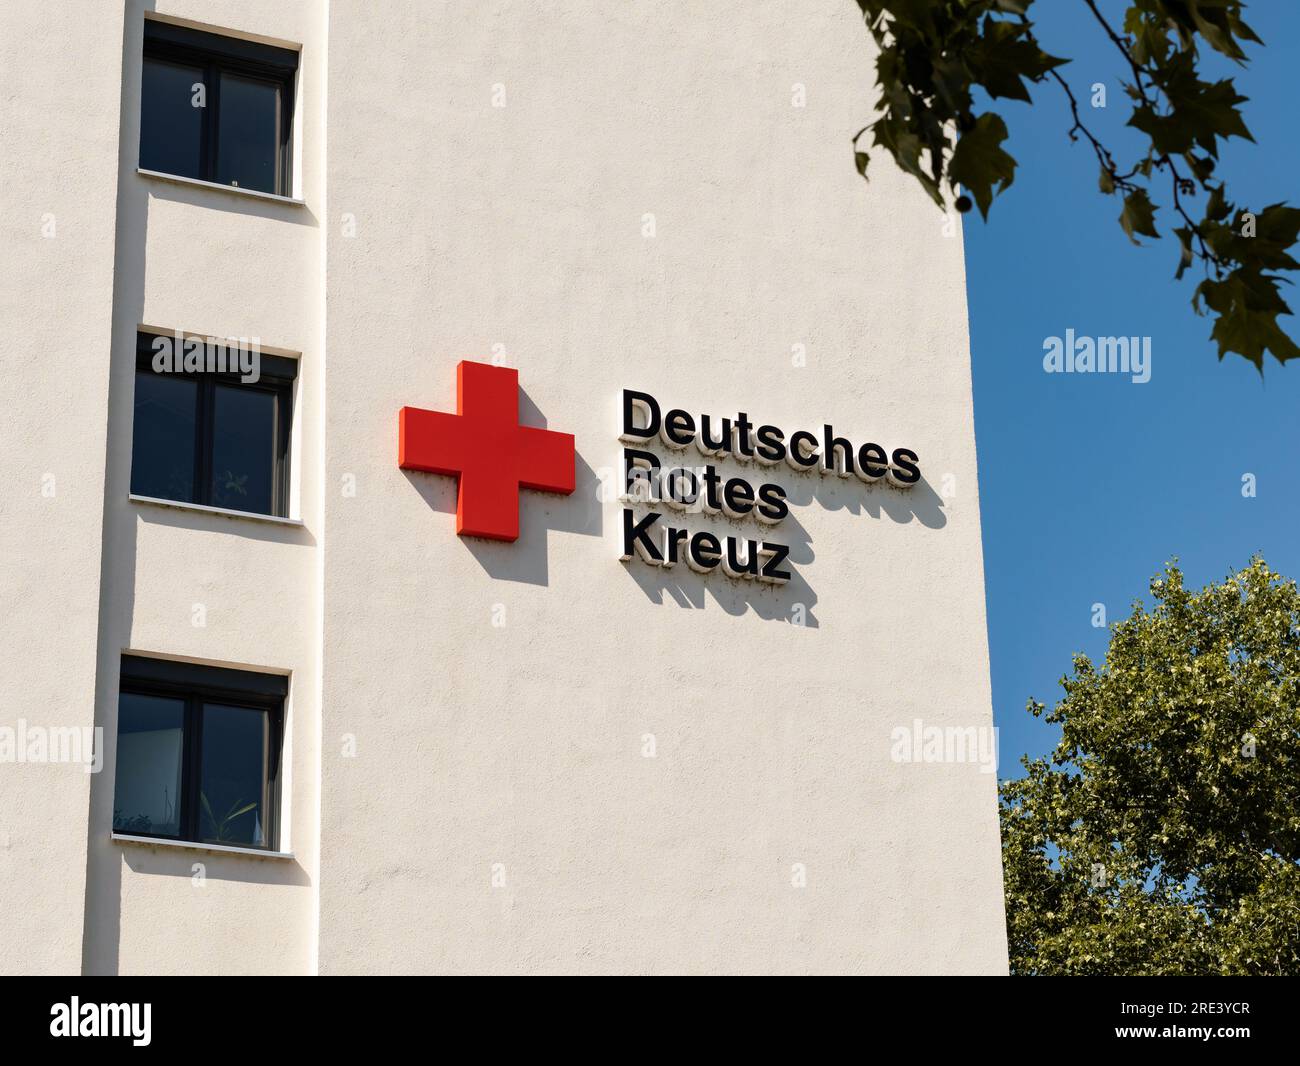 Deutsches Rotes Kreuz (German Red Cross) logo sign on a building exterior. The society offers health care services as a NGO in Germany. Stock Photo